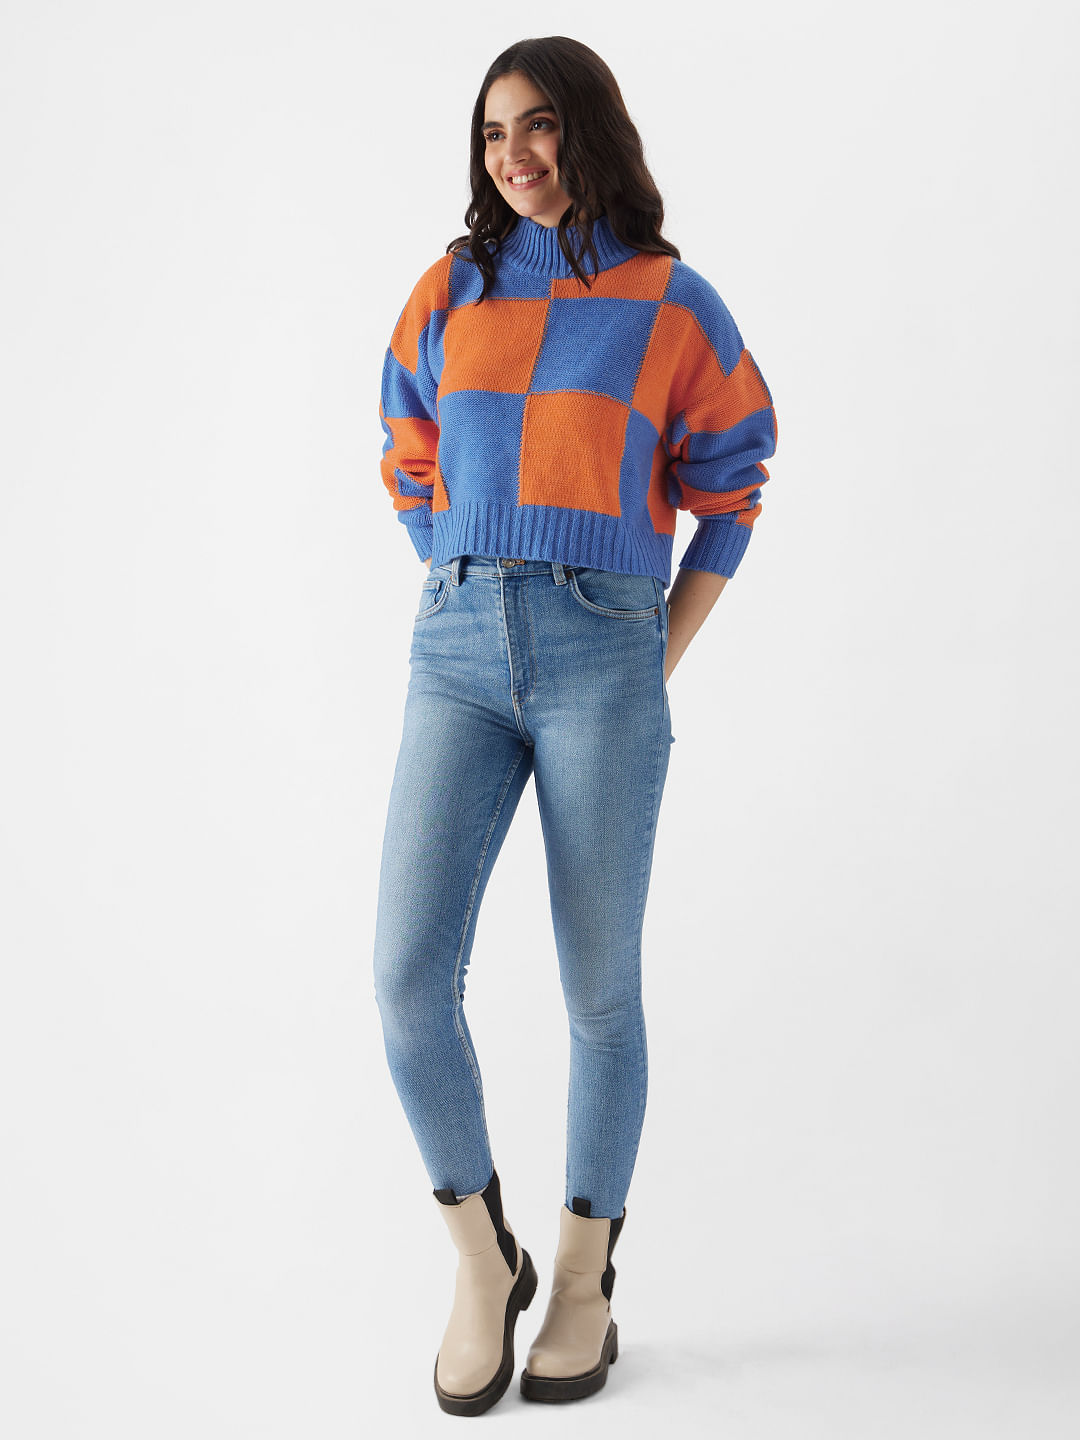 Buy Solids: Pink, Green (Colourblock) Womens Turtle Neck Sweaters Online